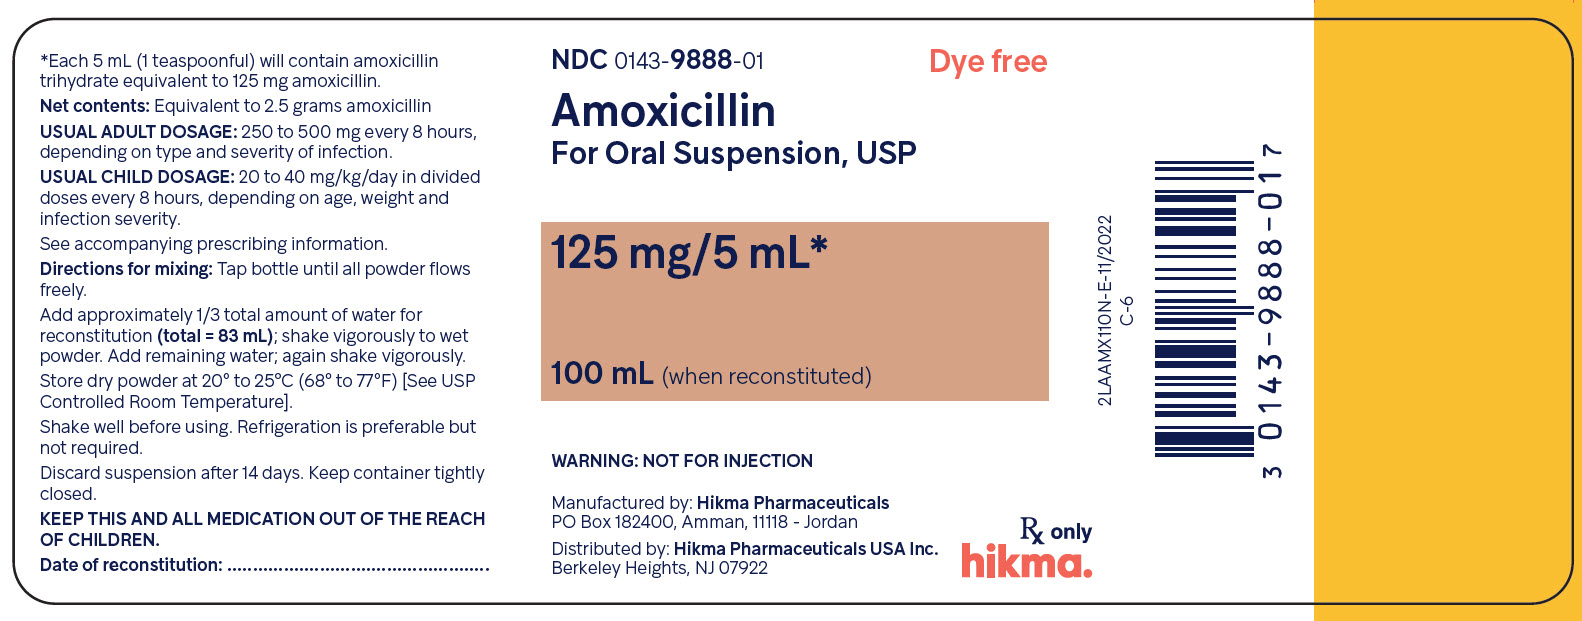 Amoxicillin for Oral Suspension, USP 125 mg/5 mL (100 mL when reconstituted)